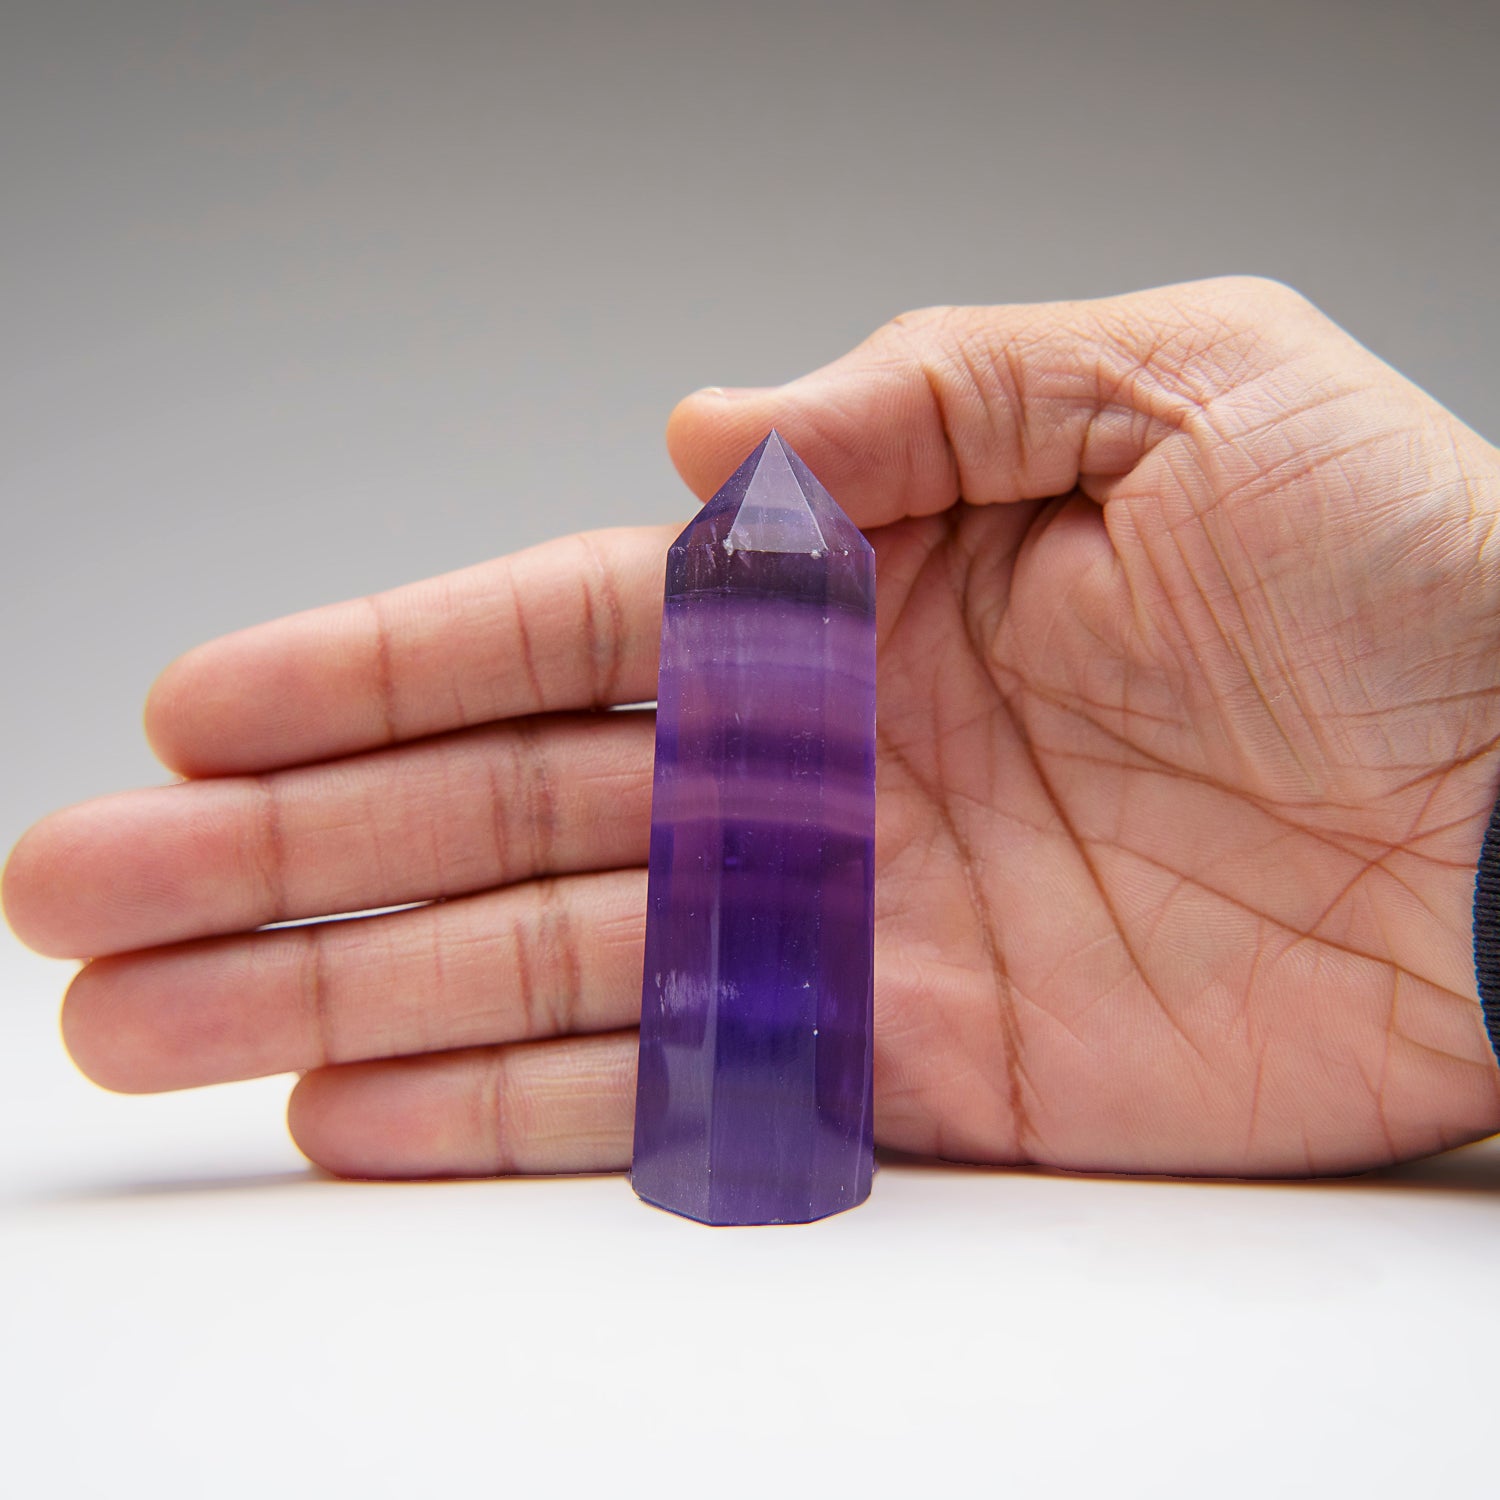 Genuine Polished Purple Fluorite Point from China (91 grams)